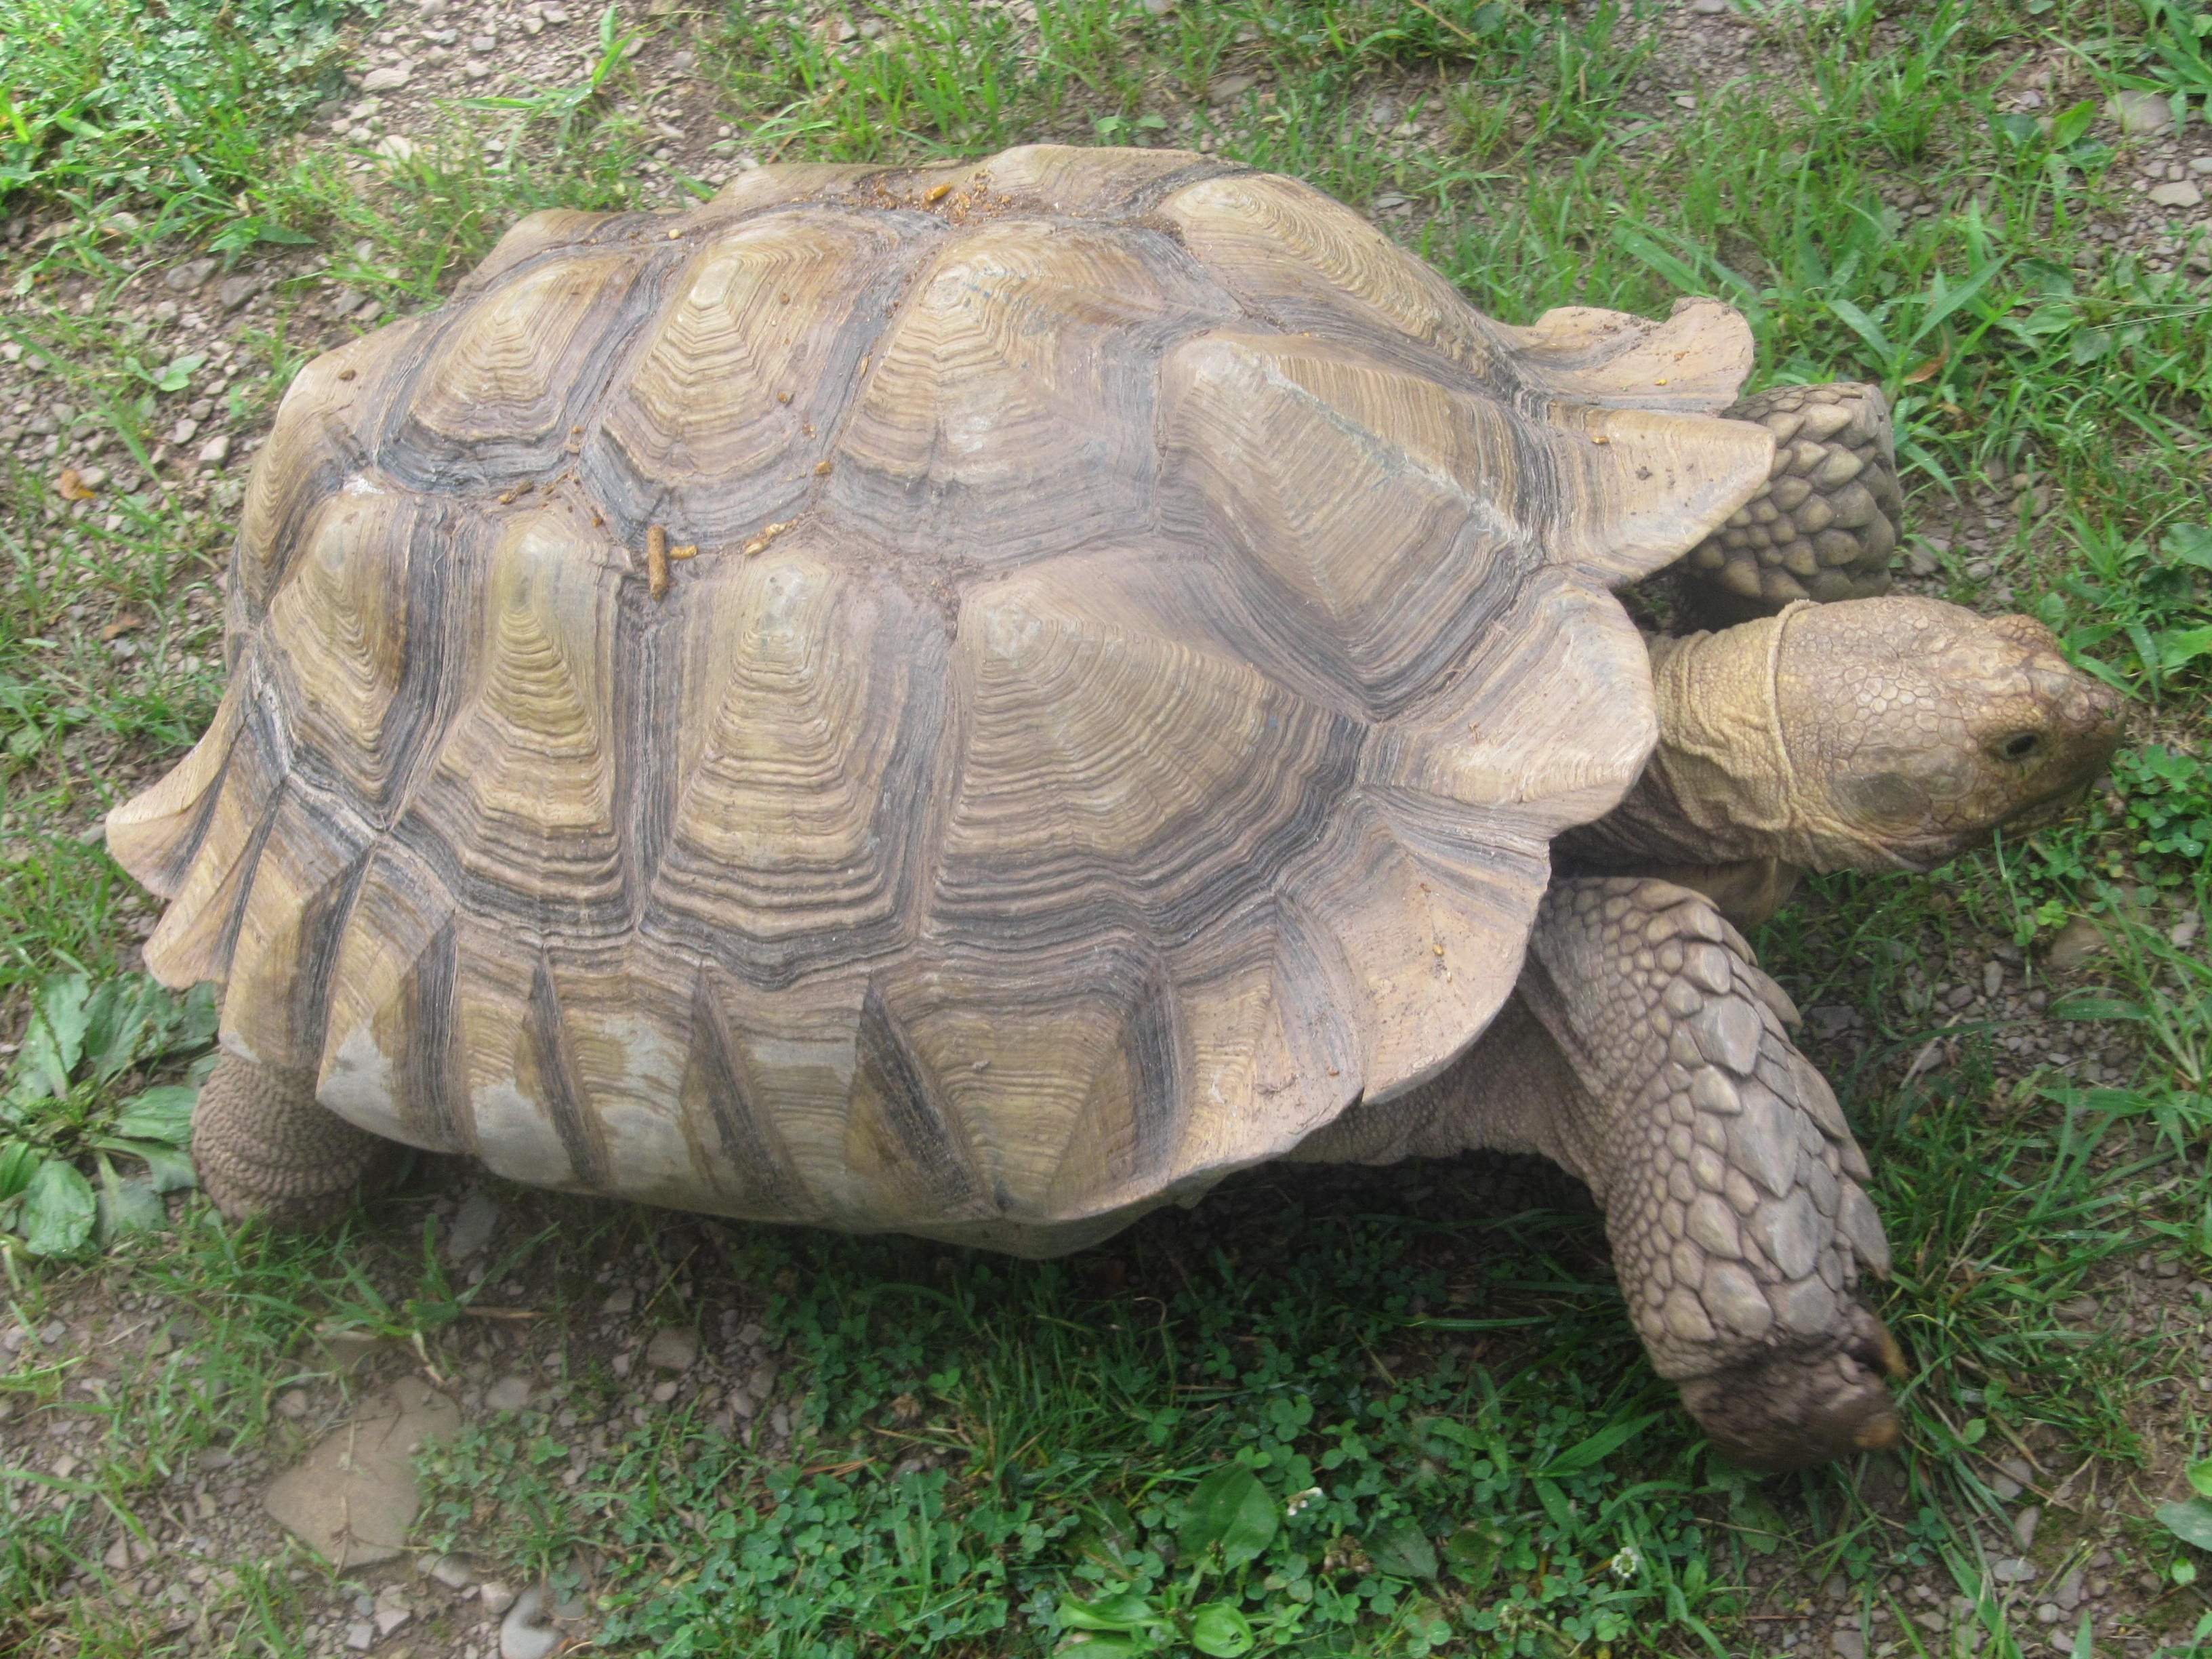 beige and gray turtle